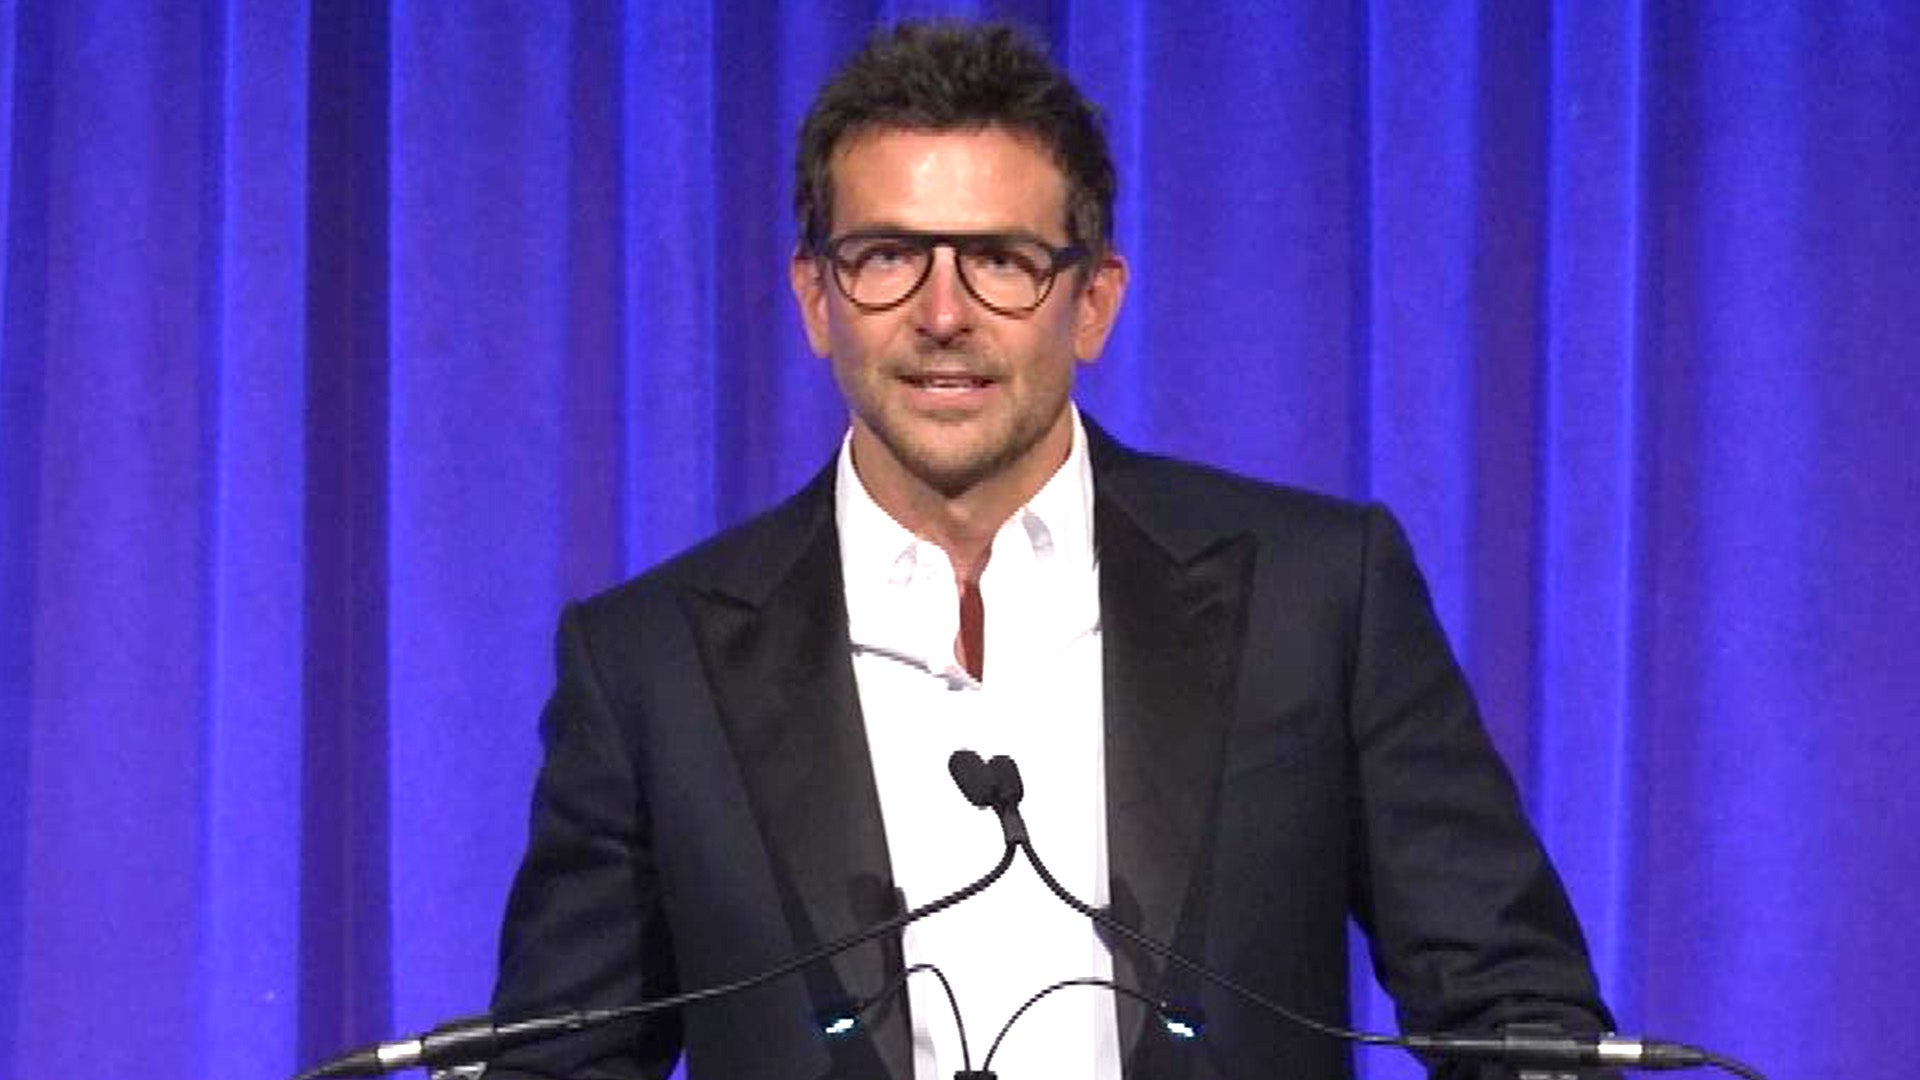 Bradley Cooper Gets Candid About Why He's ‘Still Alive’ in National Board of Review Speech